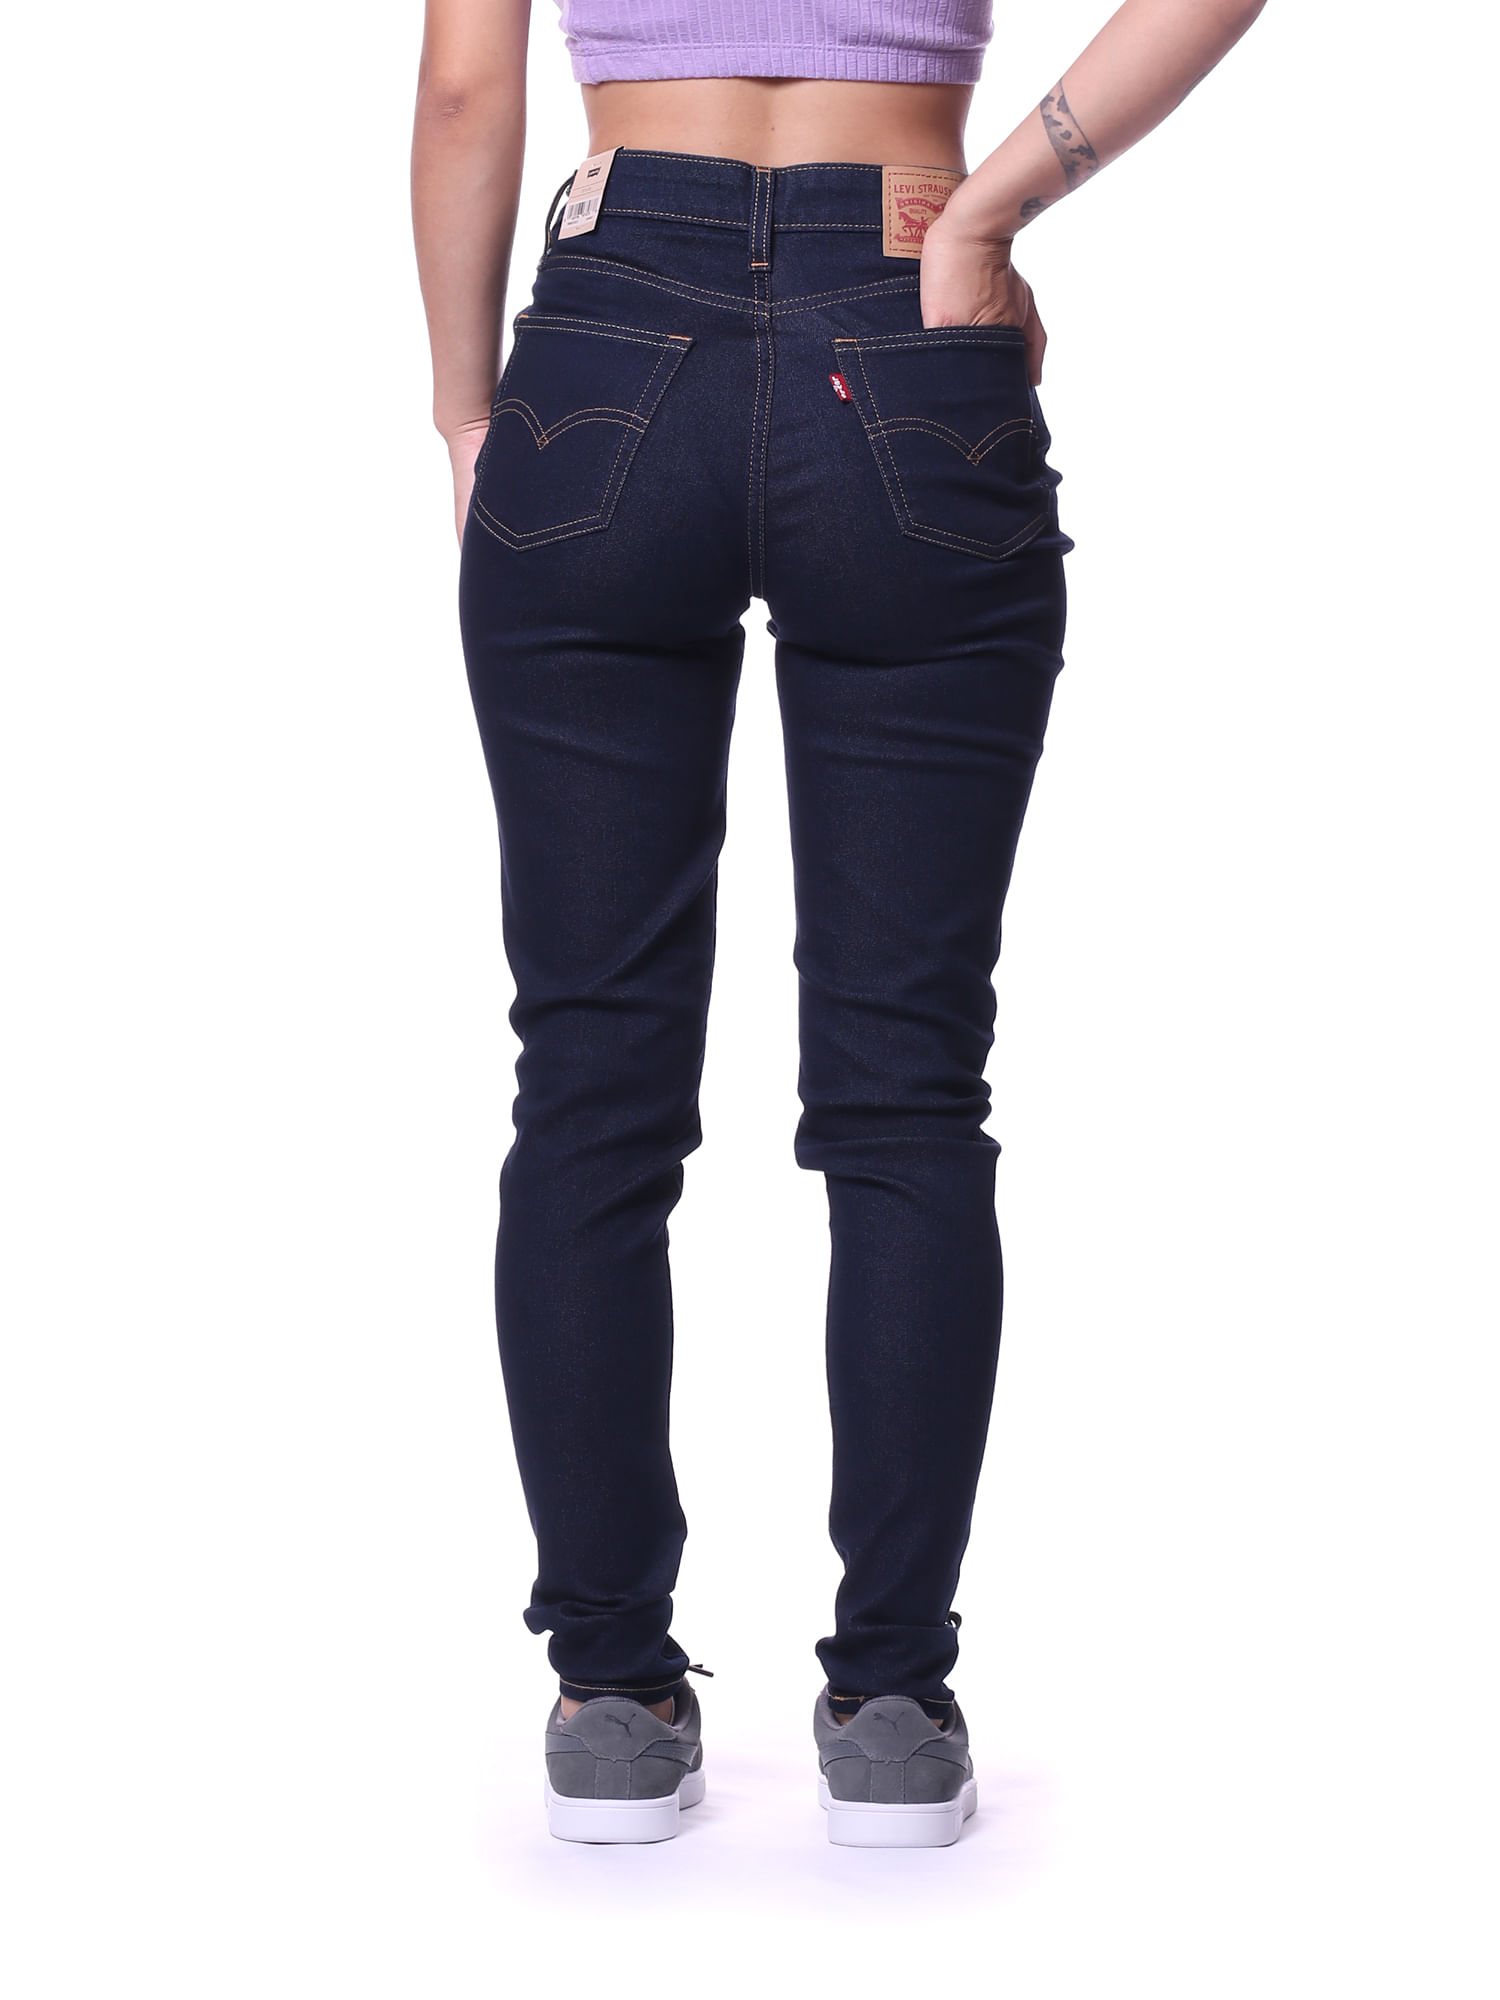 Calca-jeans-levi-s-721-high-rise-skinny-Jeans-escuro